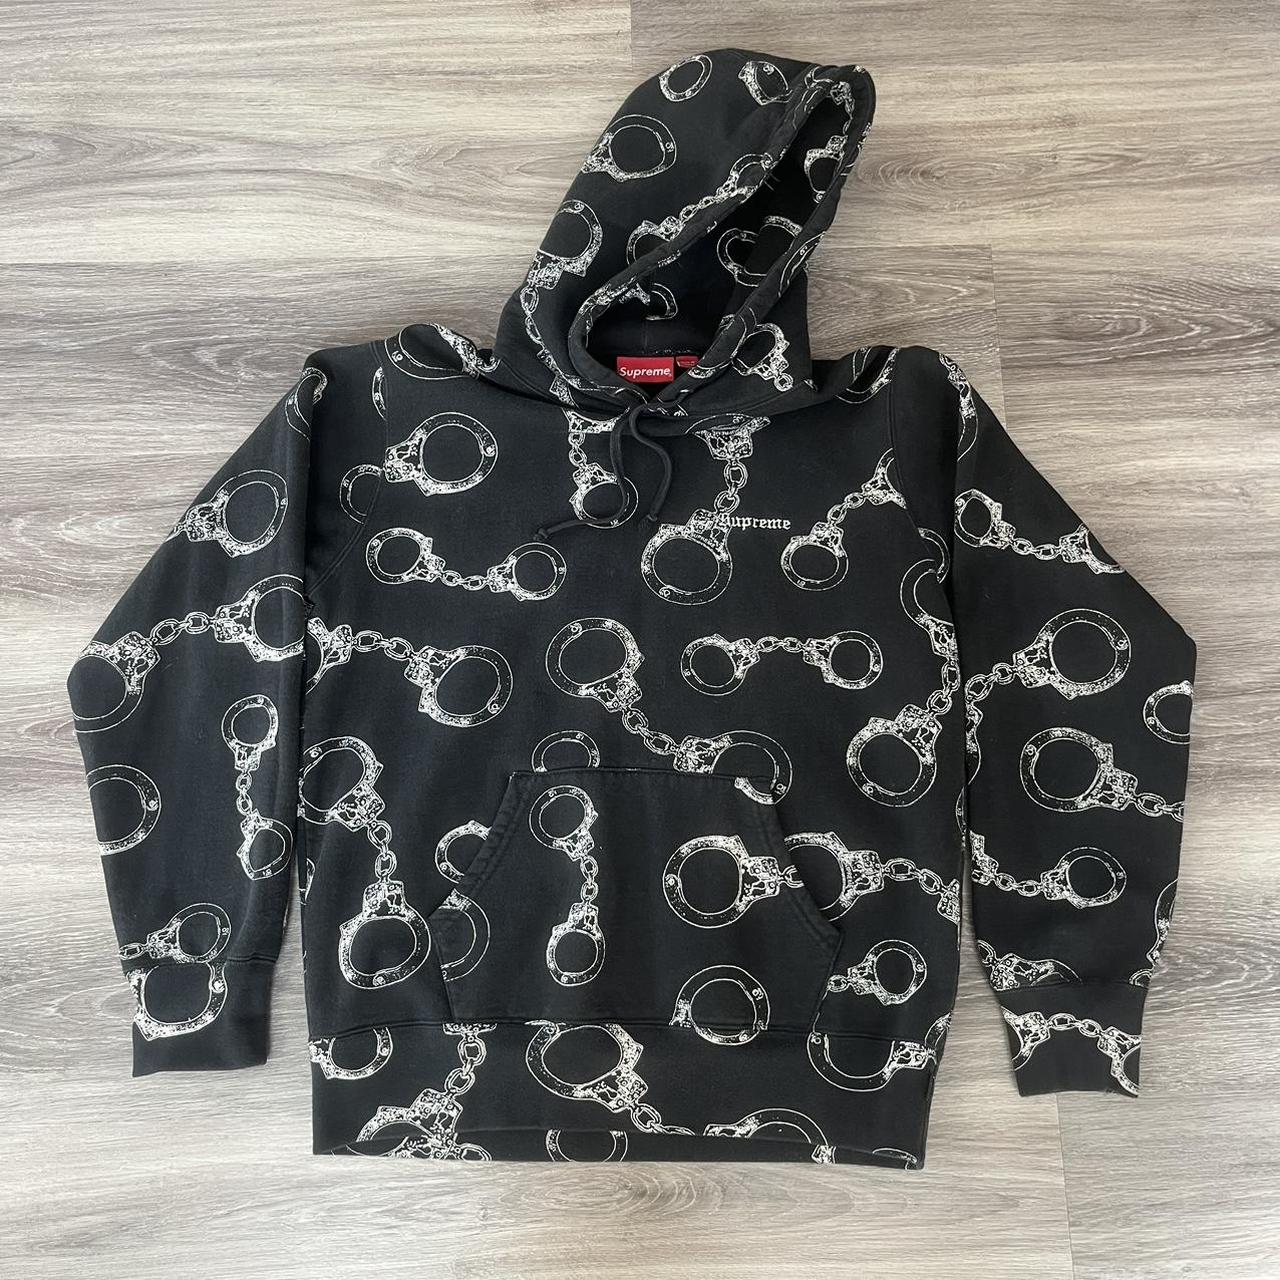 Supreme A/W 2017 Handcuffs Hoodie Used but in... - Depop